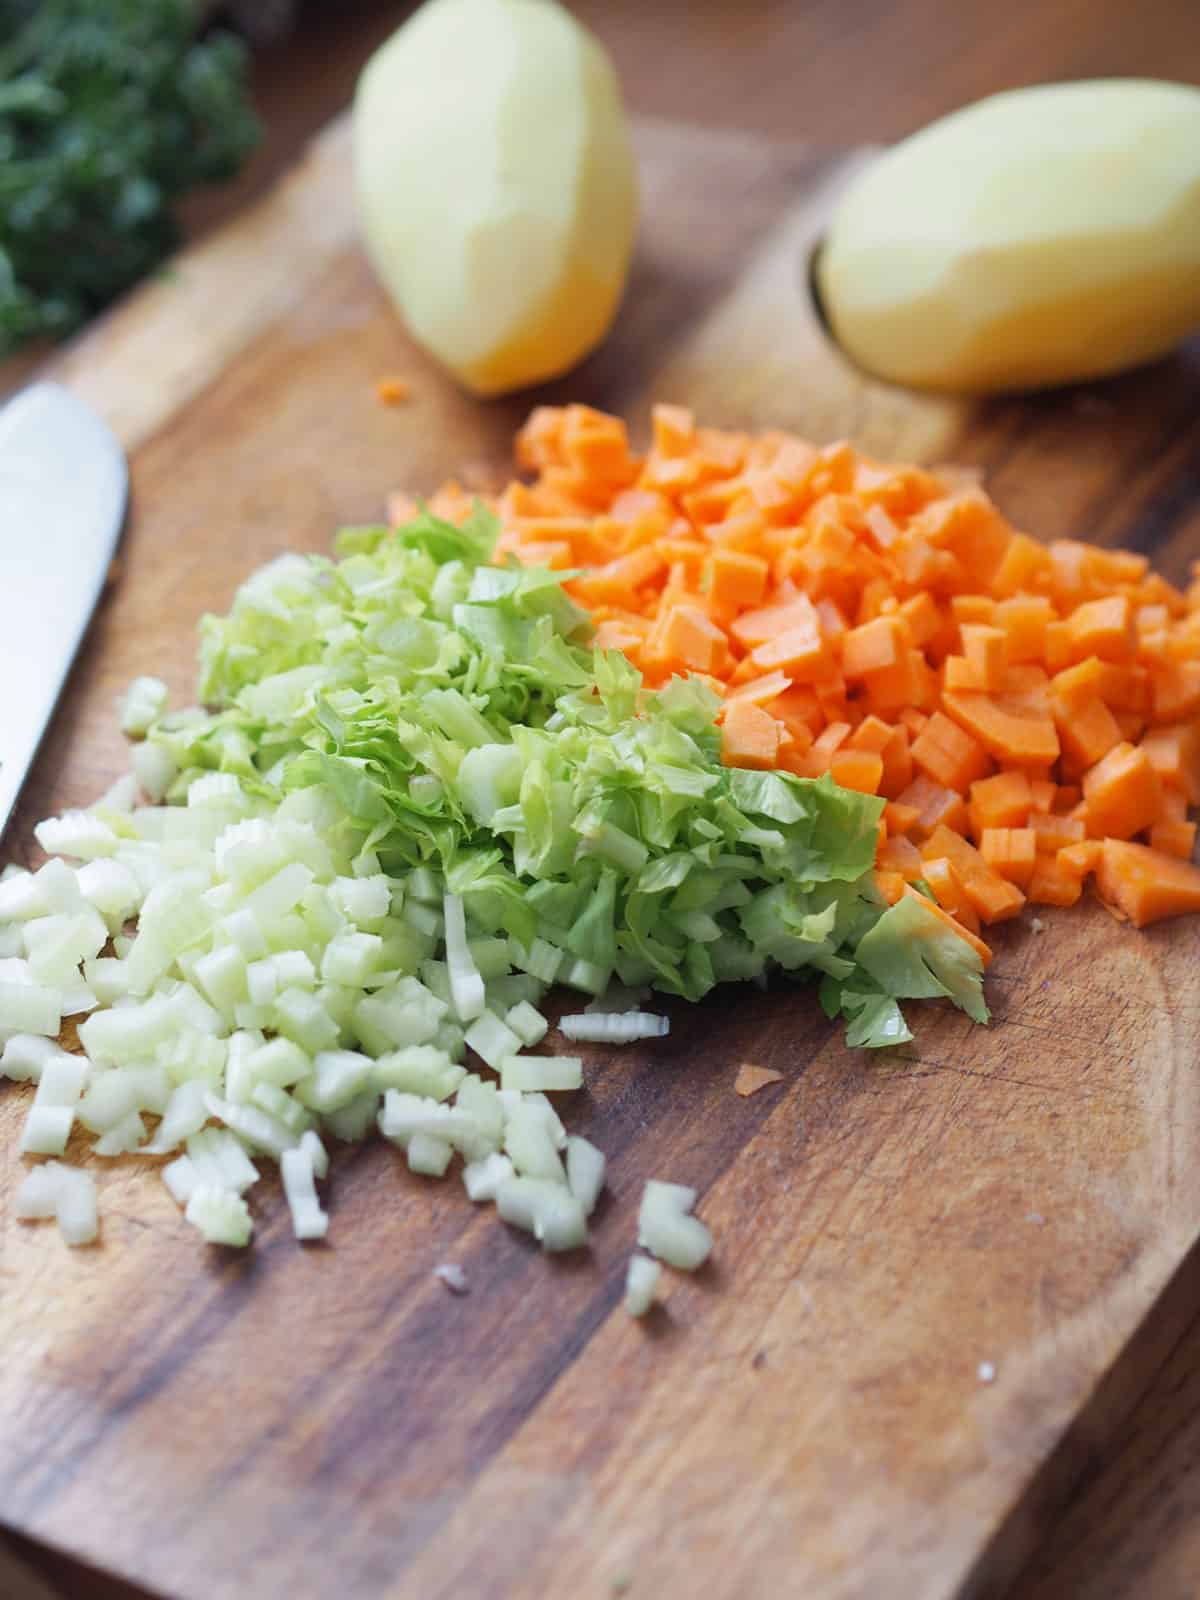 Diced onion, celery, and carrot on a wooden cutting board.